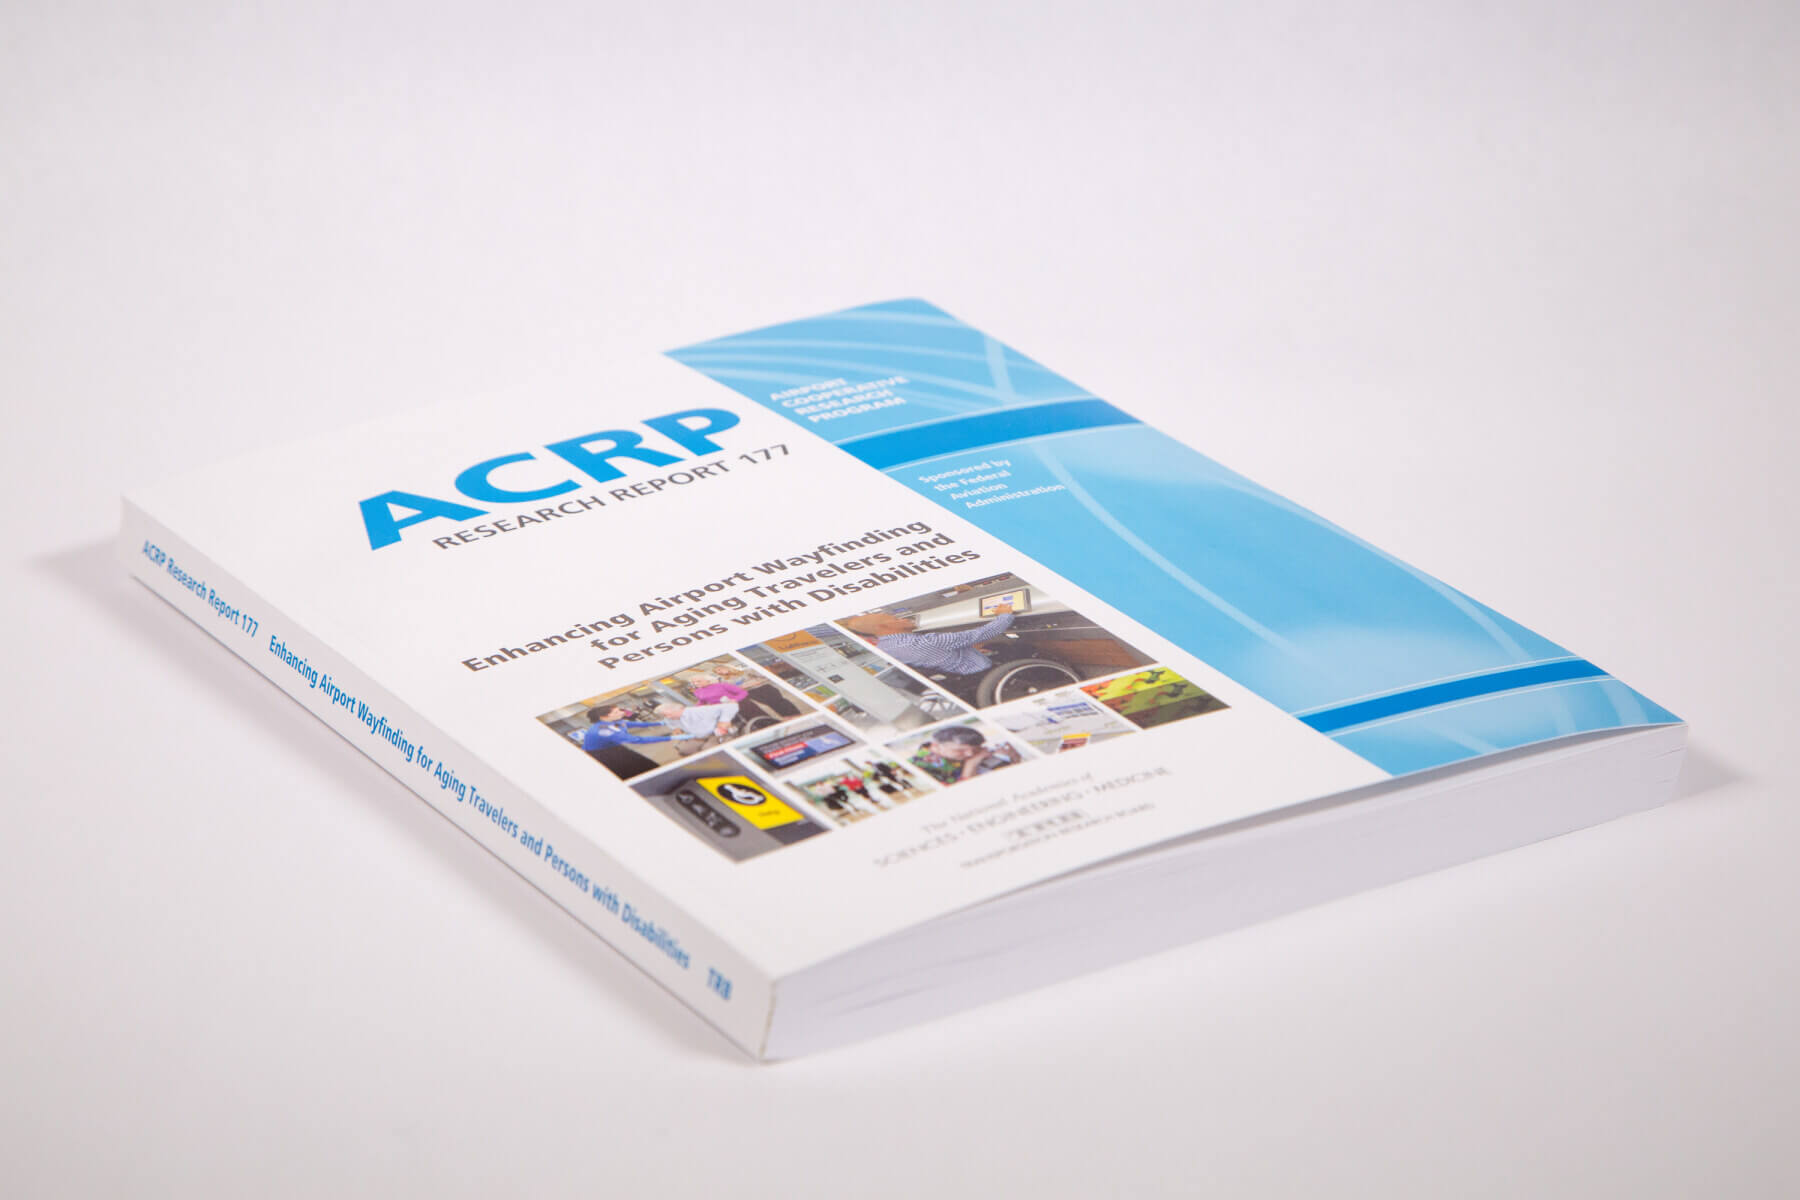 a close up of the cover of ACRP research report 177